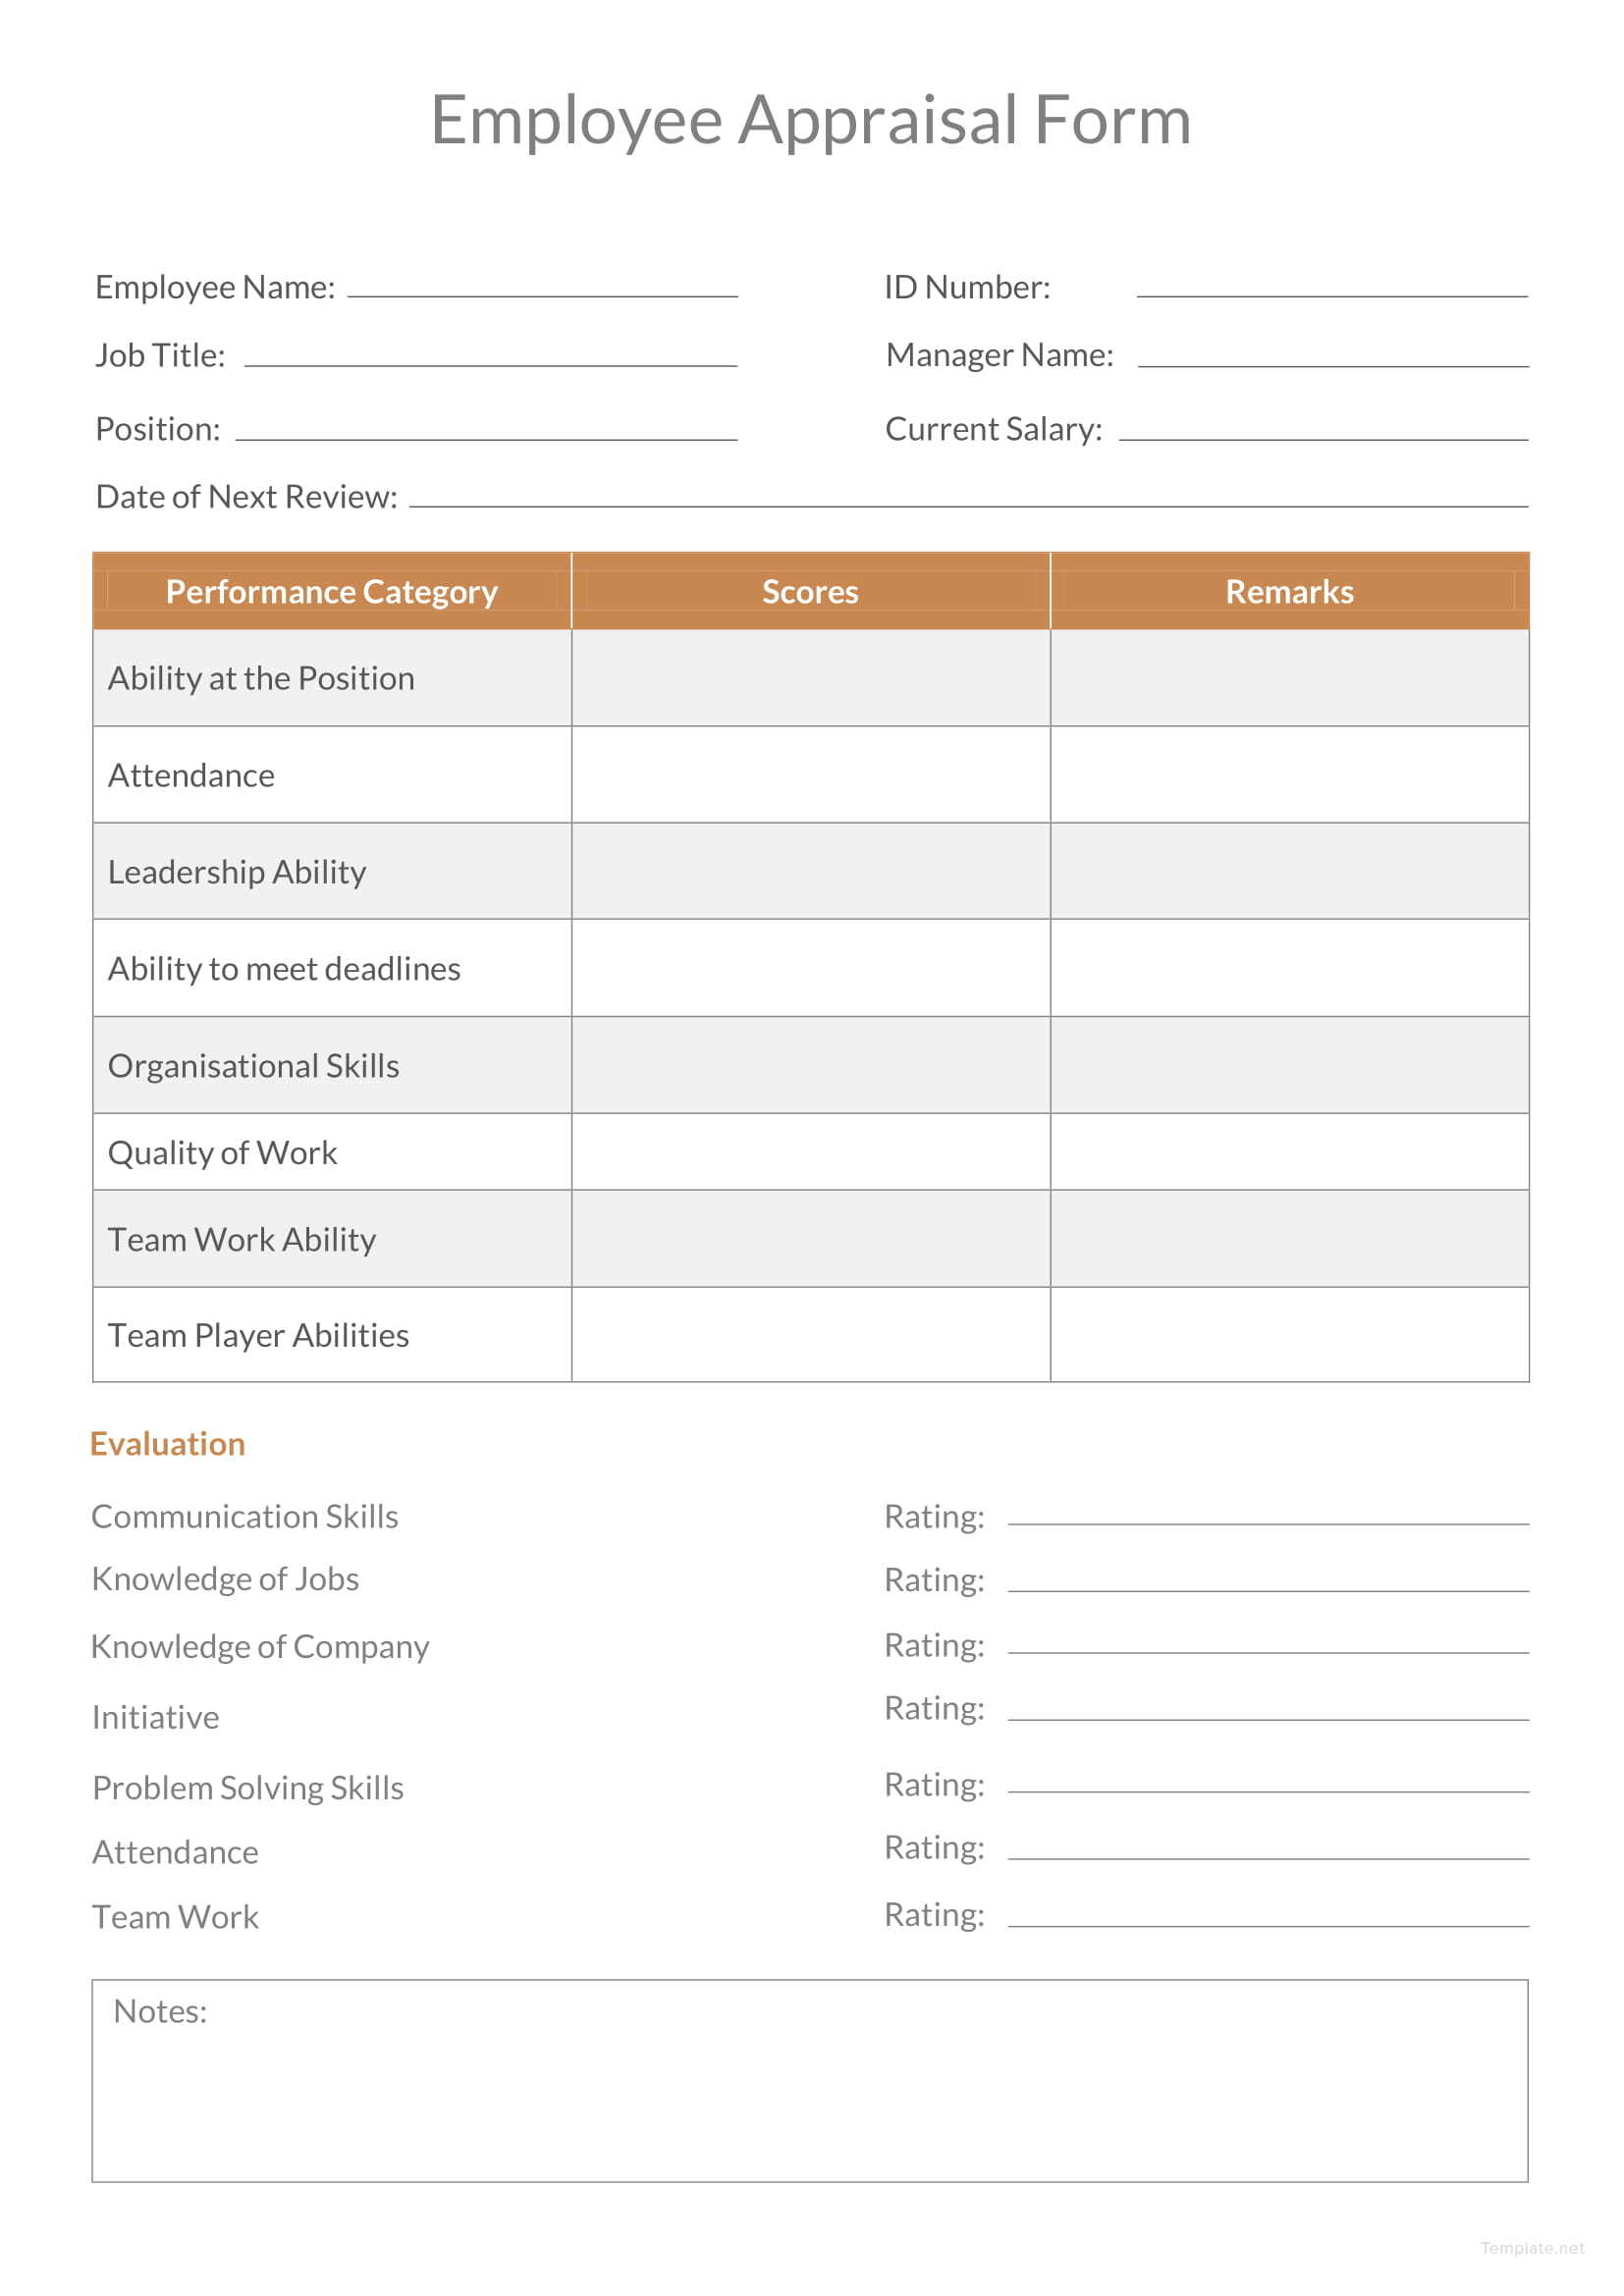 Employee Appraisal Form Template In Microsoft Word Template